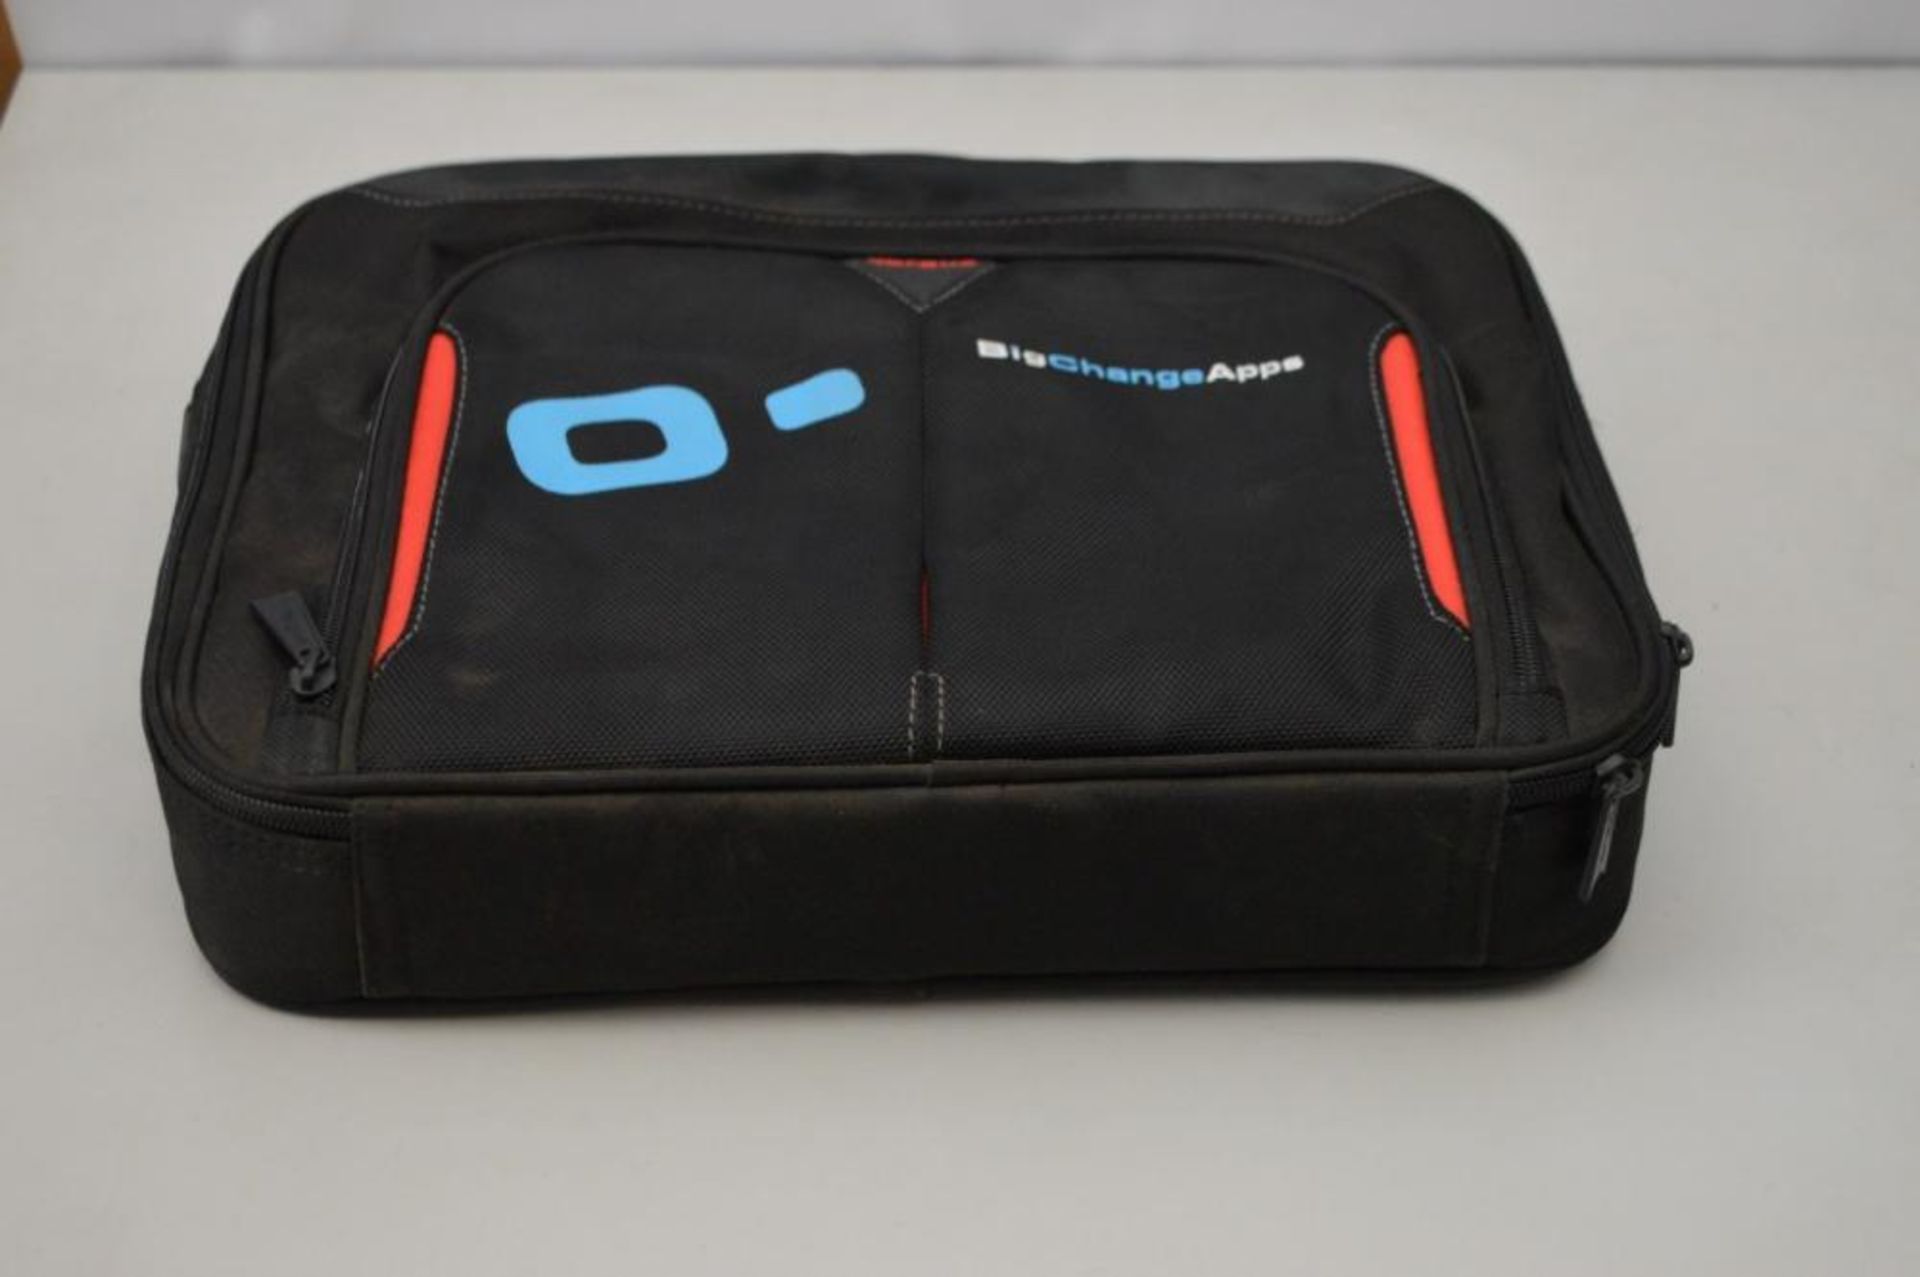 12 x Big Change Tablet Bags 16inchs - Ref TP394 - CL394 - Location: Altrincham WA14 - UP N A - Image 2 of 5